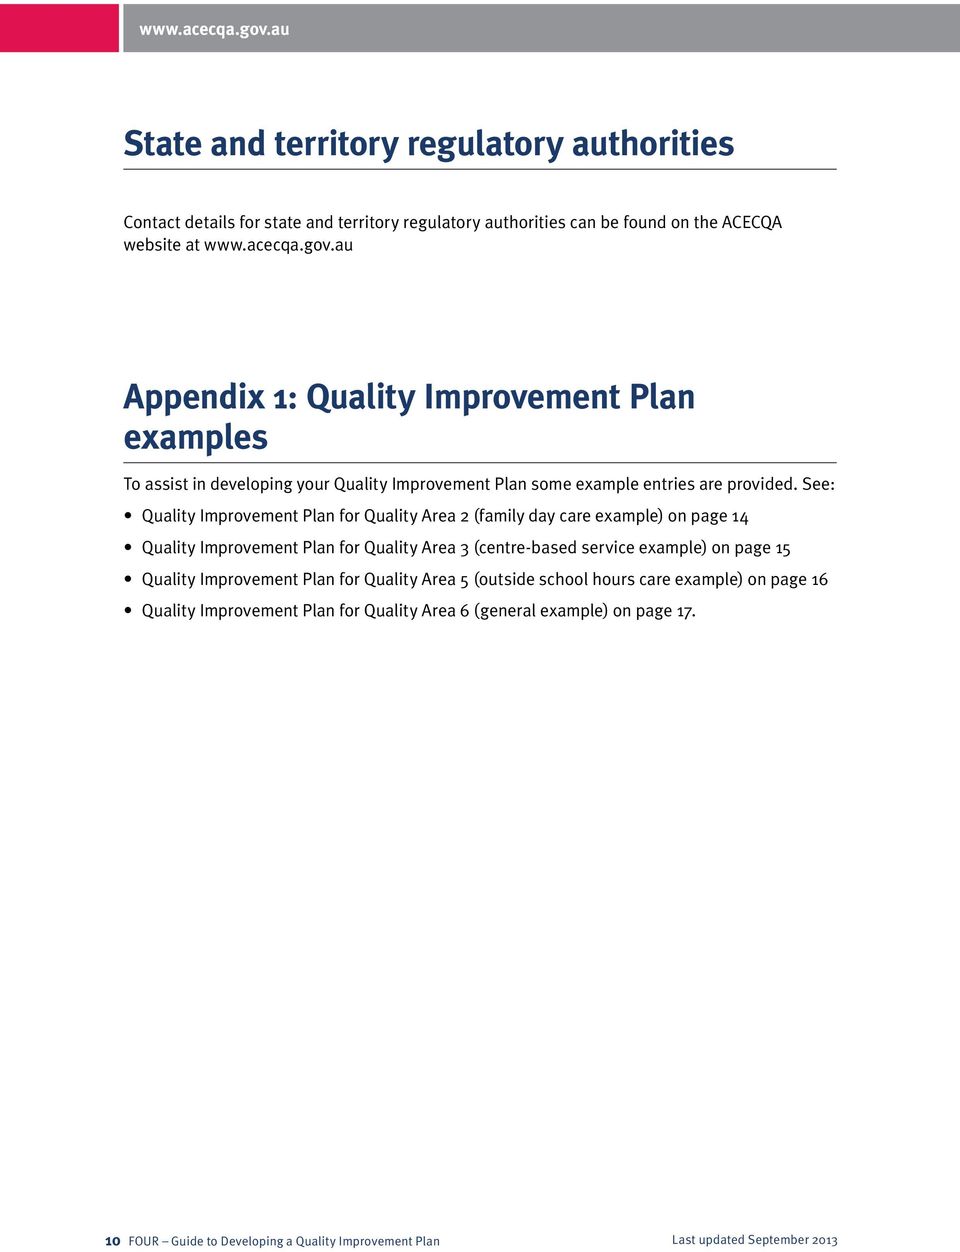 See: Quality Improvement Plan for Quality Area 2 (family day care example) on page 14 Quality Improvement Plan for Quality Area 3 (centre-based service example) on page 15